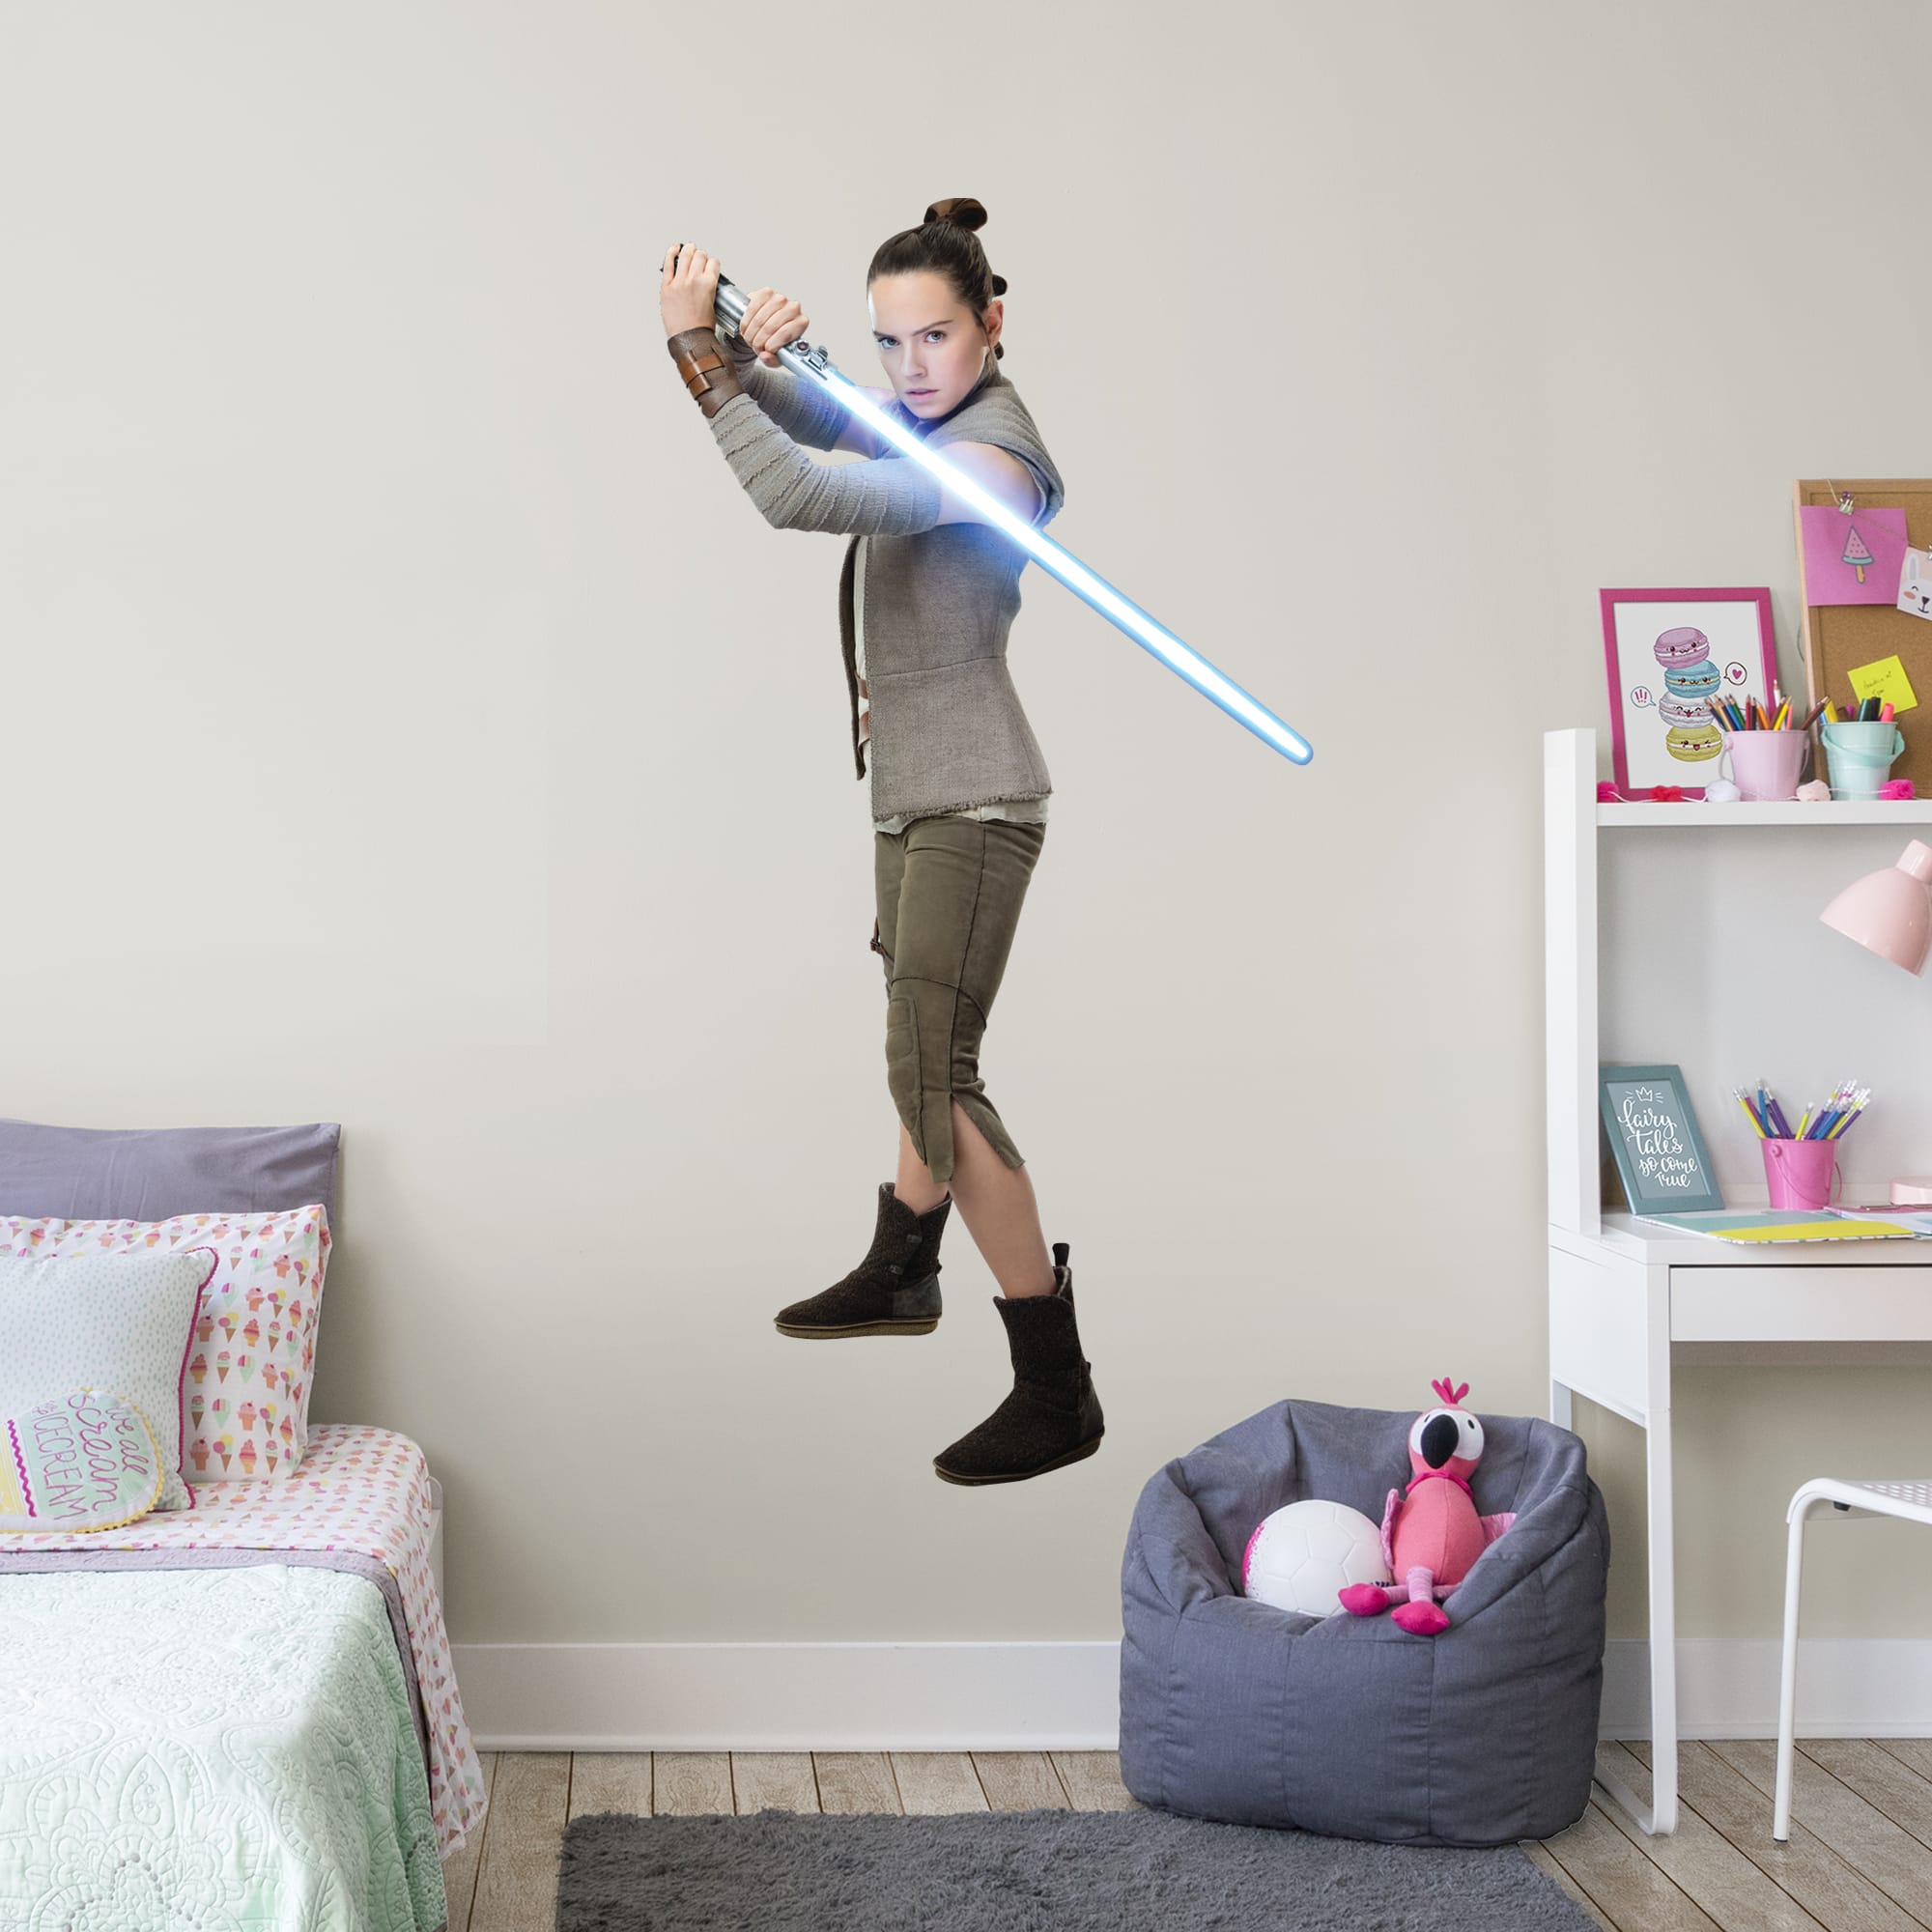 Rey: In Training - Officially Licensed Removable Wall Decal Life-Size Character + 2 Decals (37"W x 73"H) by Fathead | Vinyl